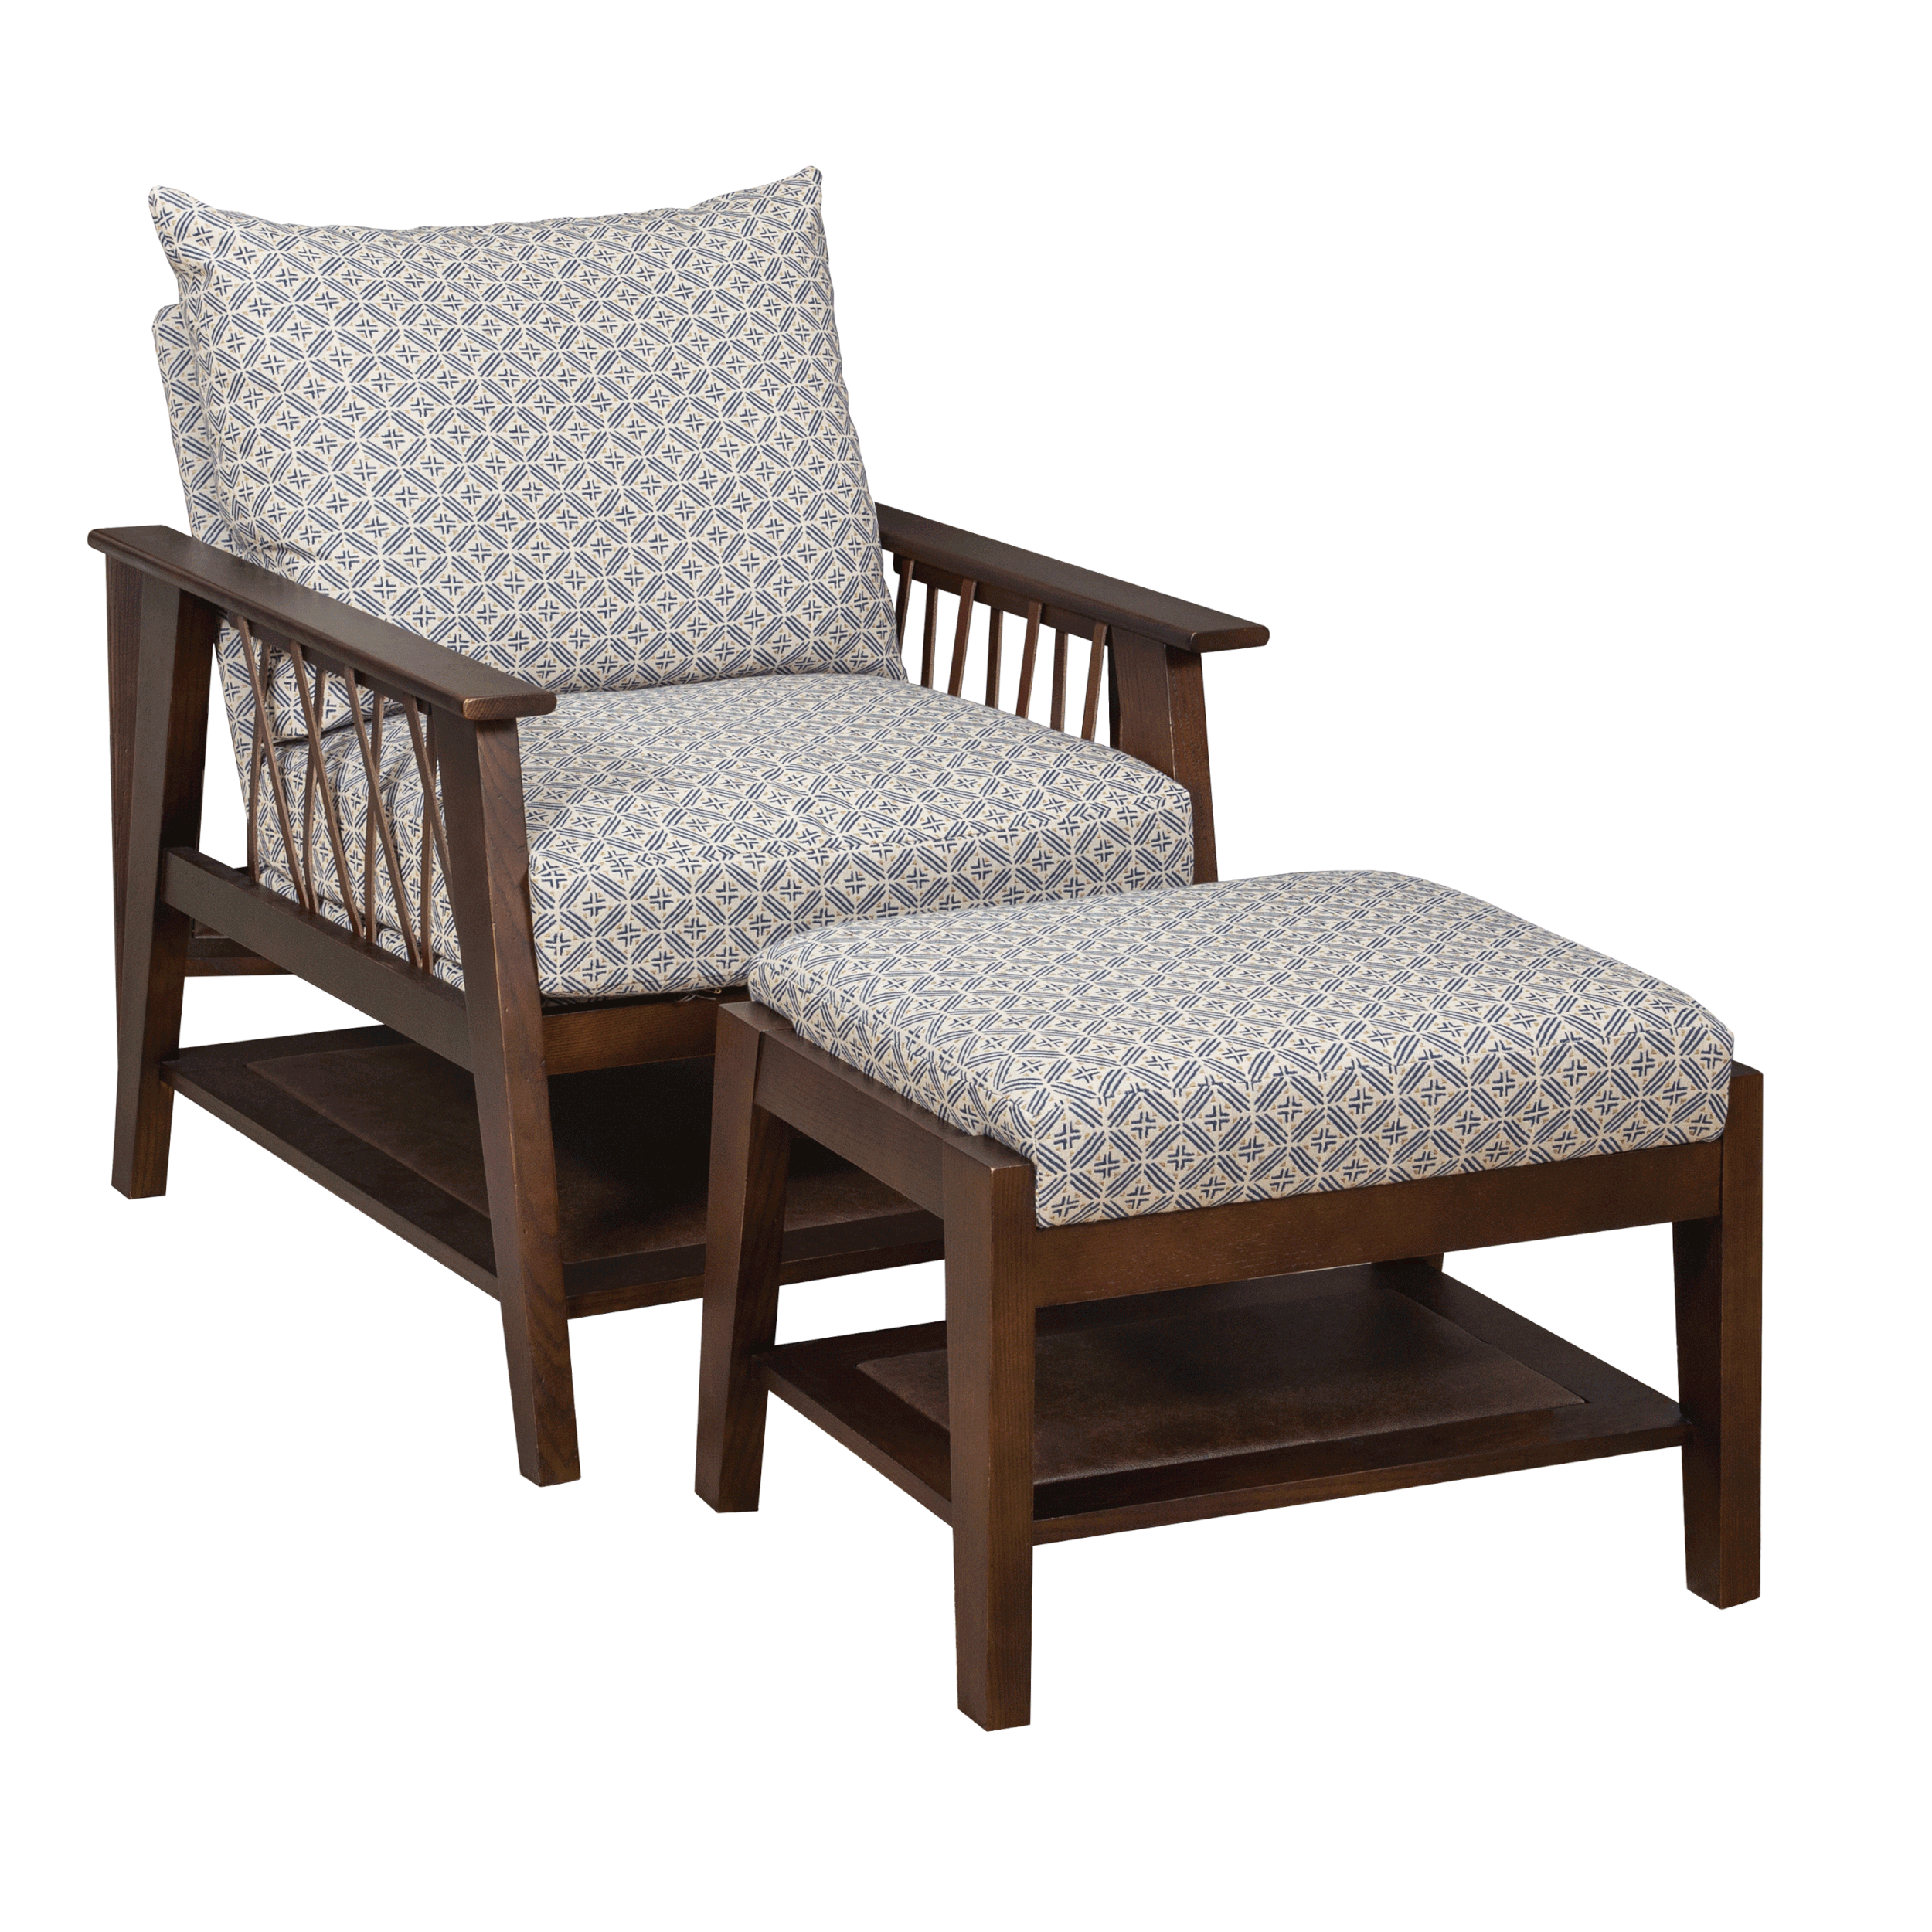 chair-with-ottoman-side-view.gif